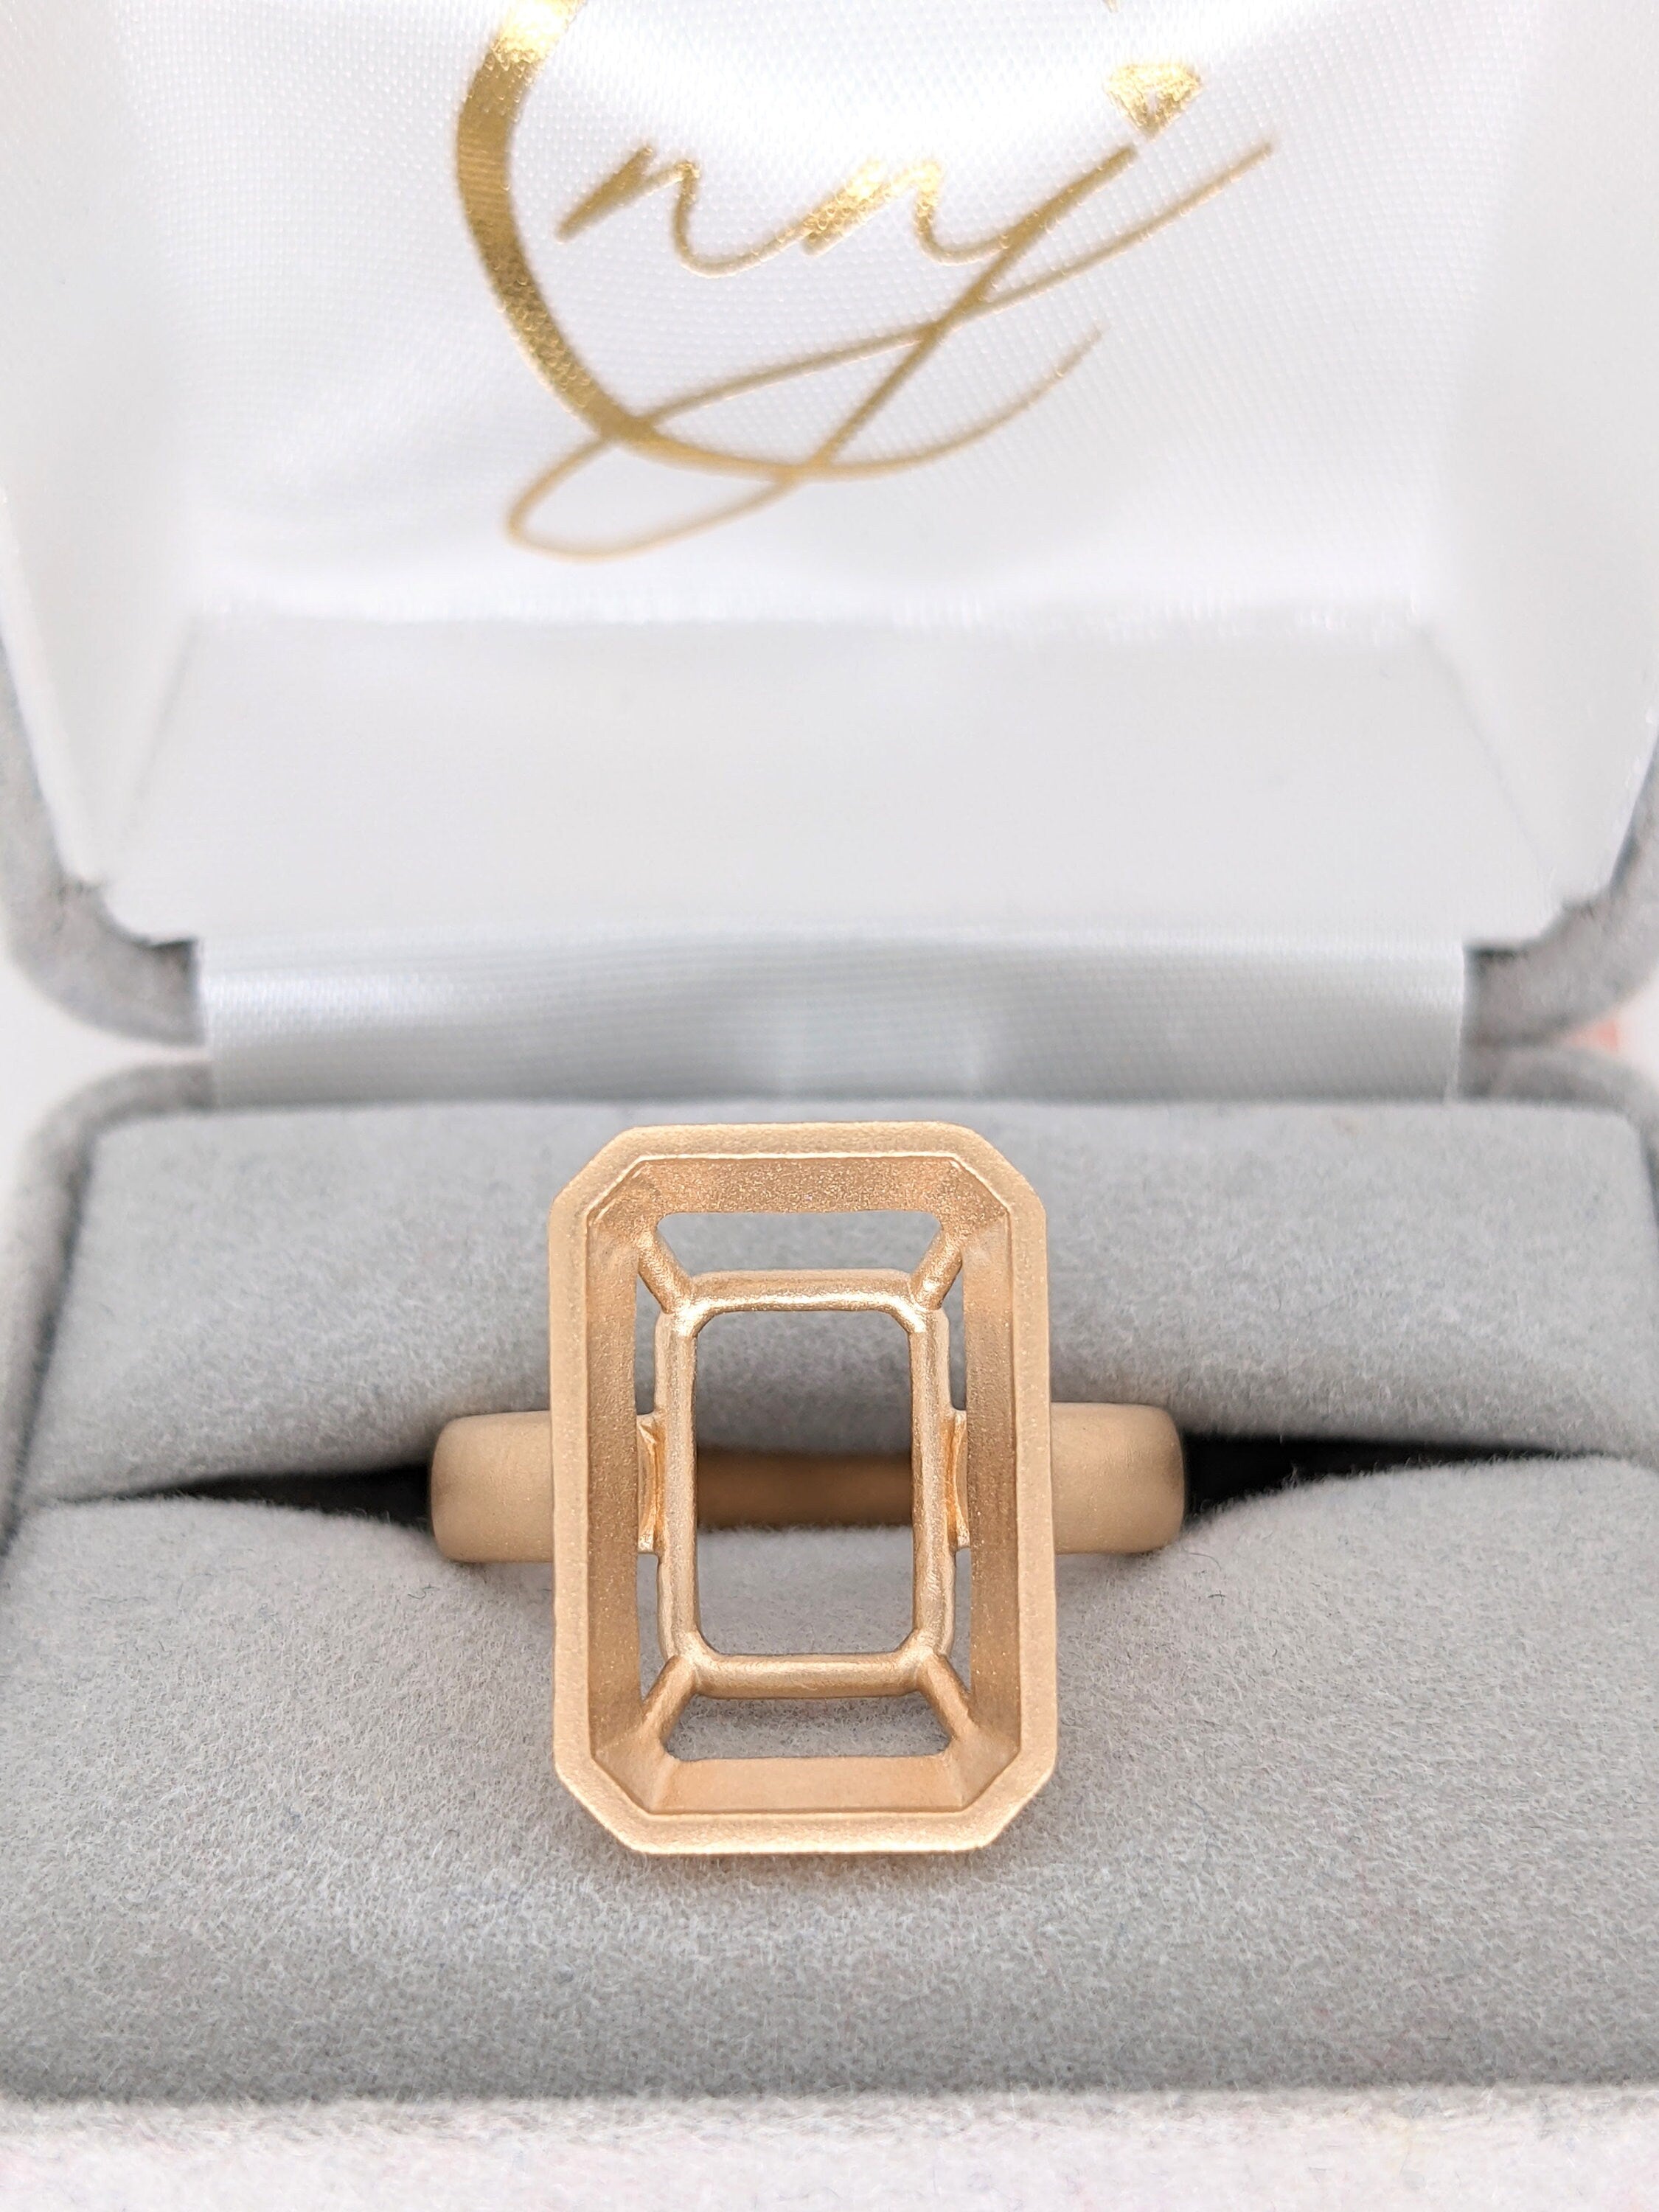 Matte Gold Bezel Set Ring Mount in Solid 18k Gold | Emerald Cut | Solitaire Setting | Custom Sizes | Customizable